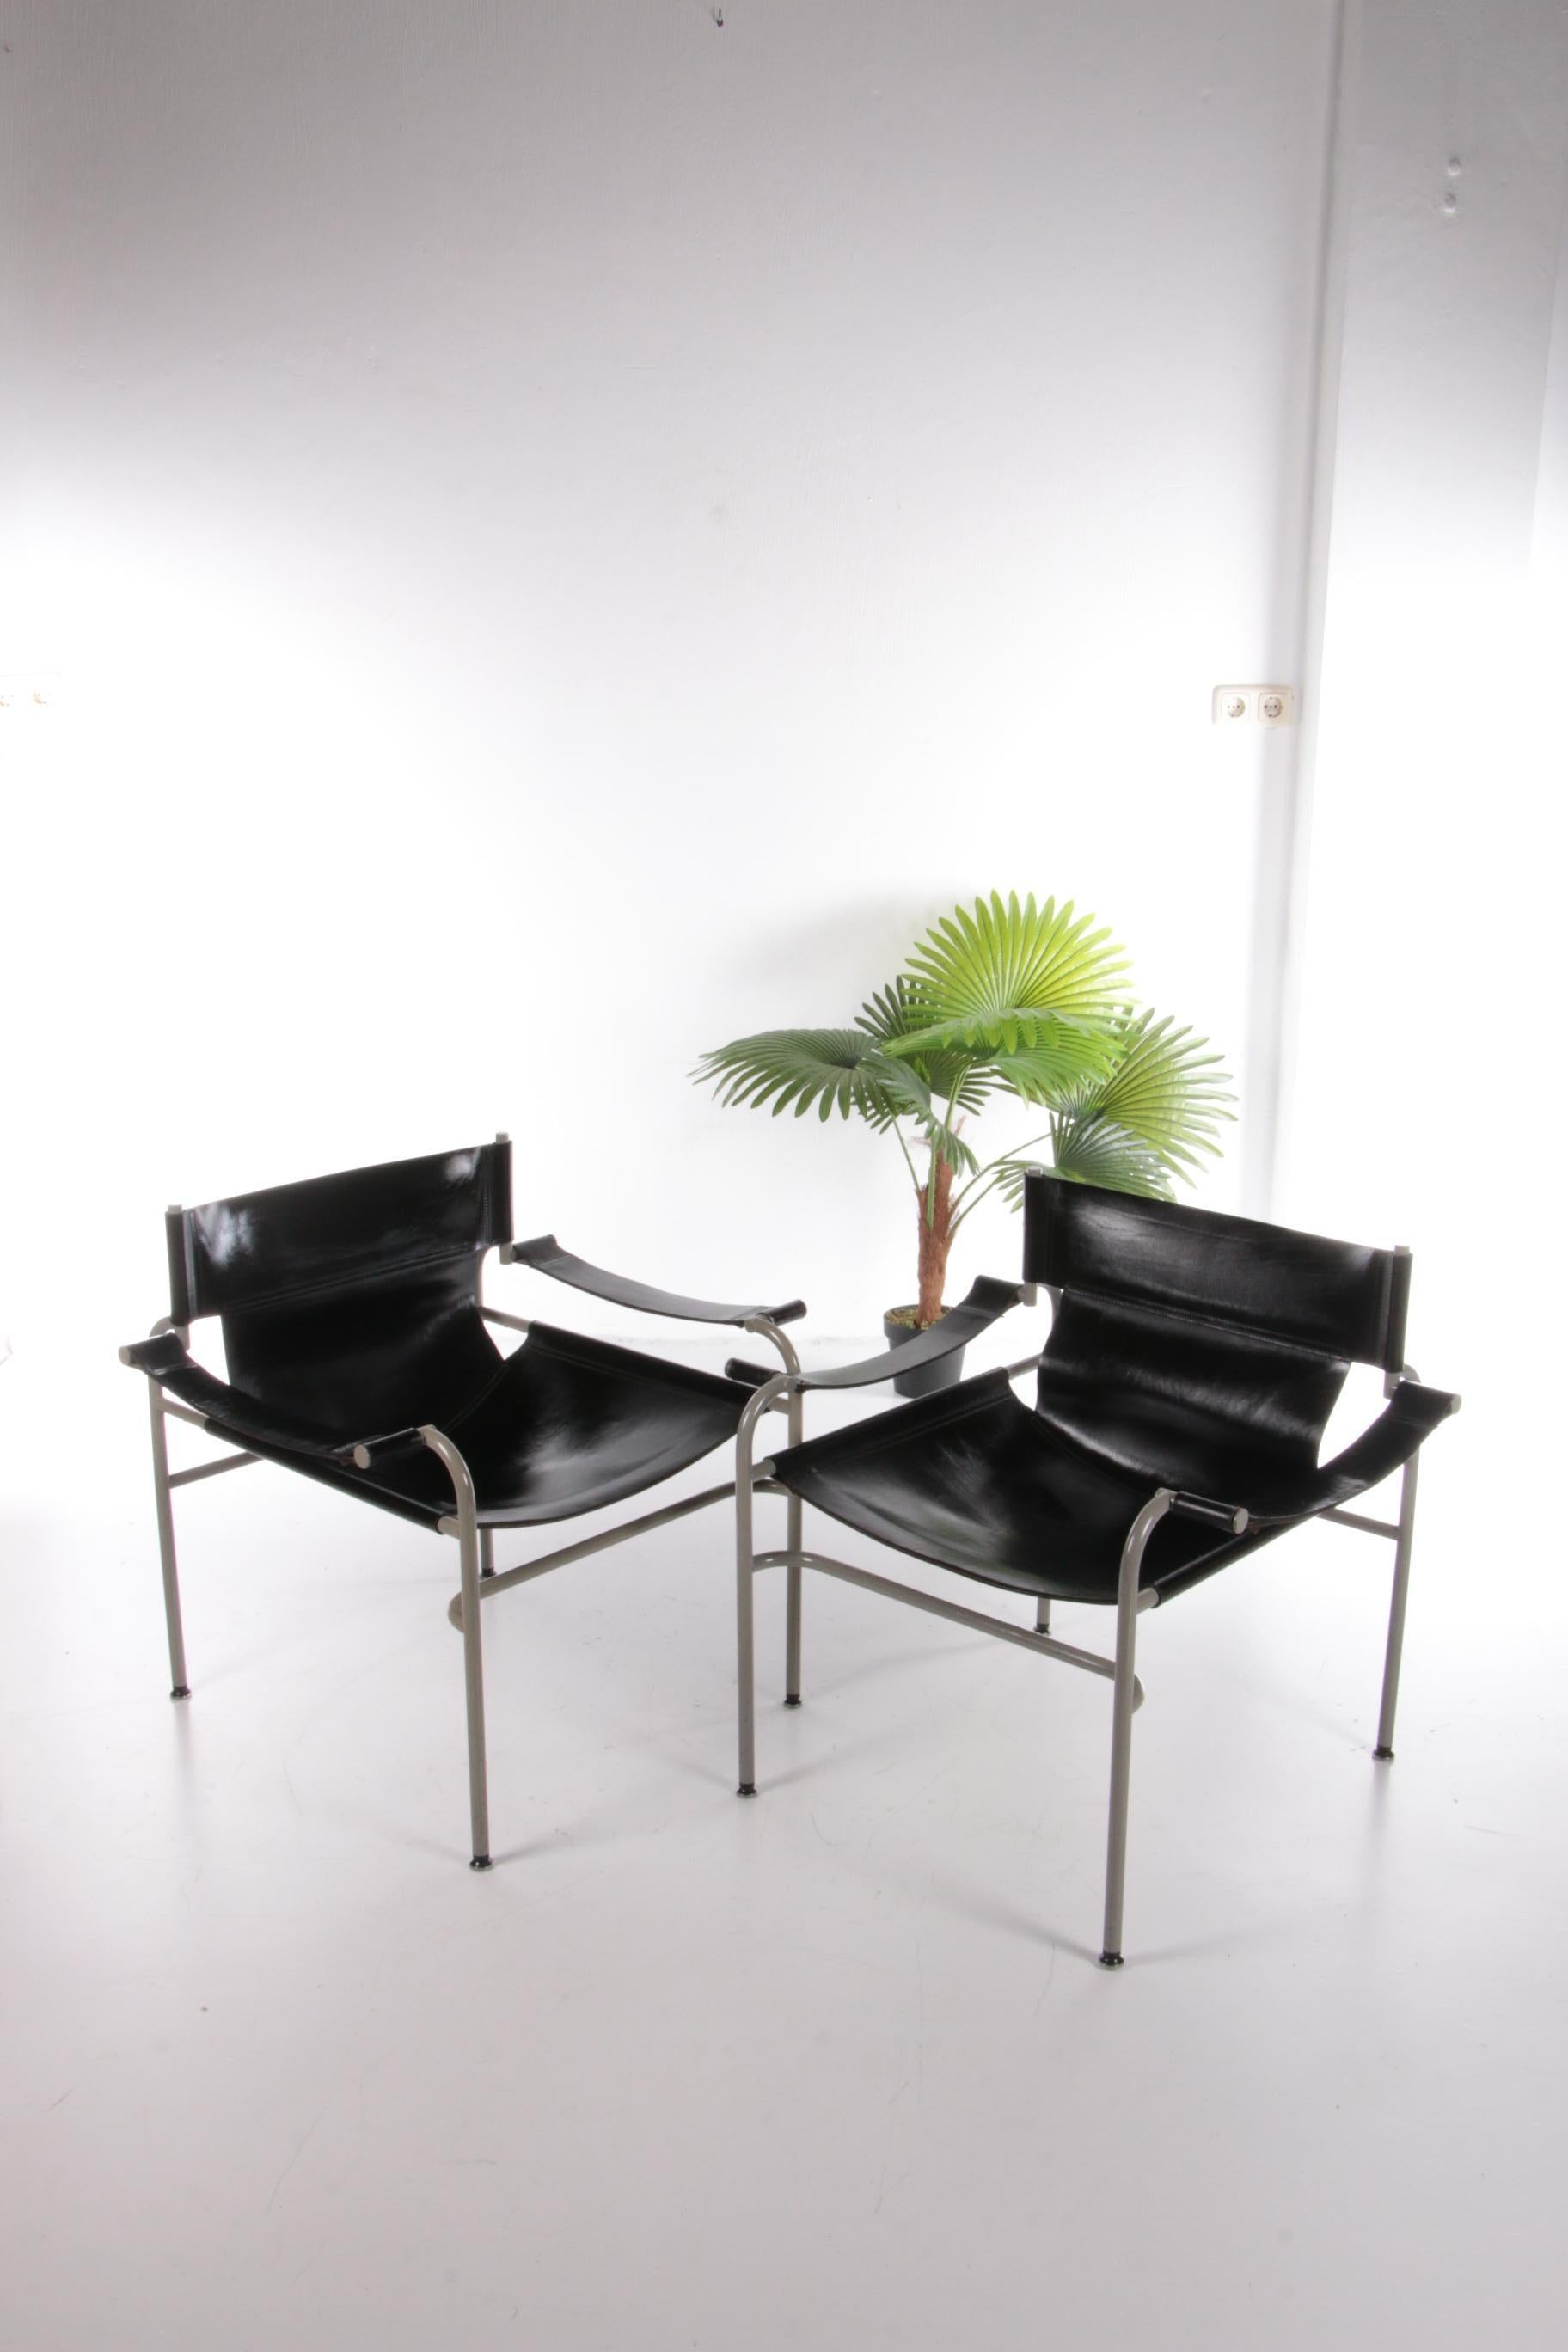 Walter Antonis set of 2 saddle leather armchairs made by 't Spectrum, 1970


Beautiful set of rare black saddle leather armchairs by Walter Antonis for 't Spectrum.

These armchairs were only produced for one year, by furniture company I-Form